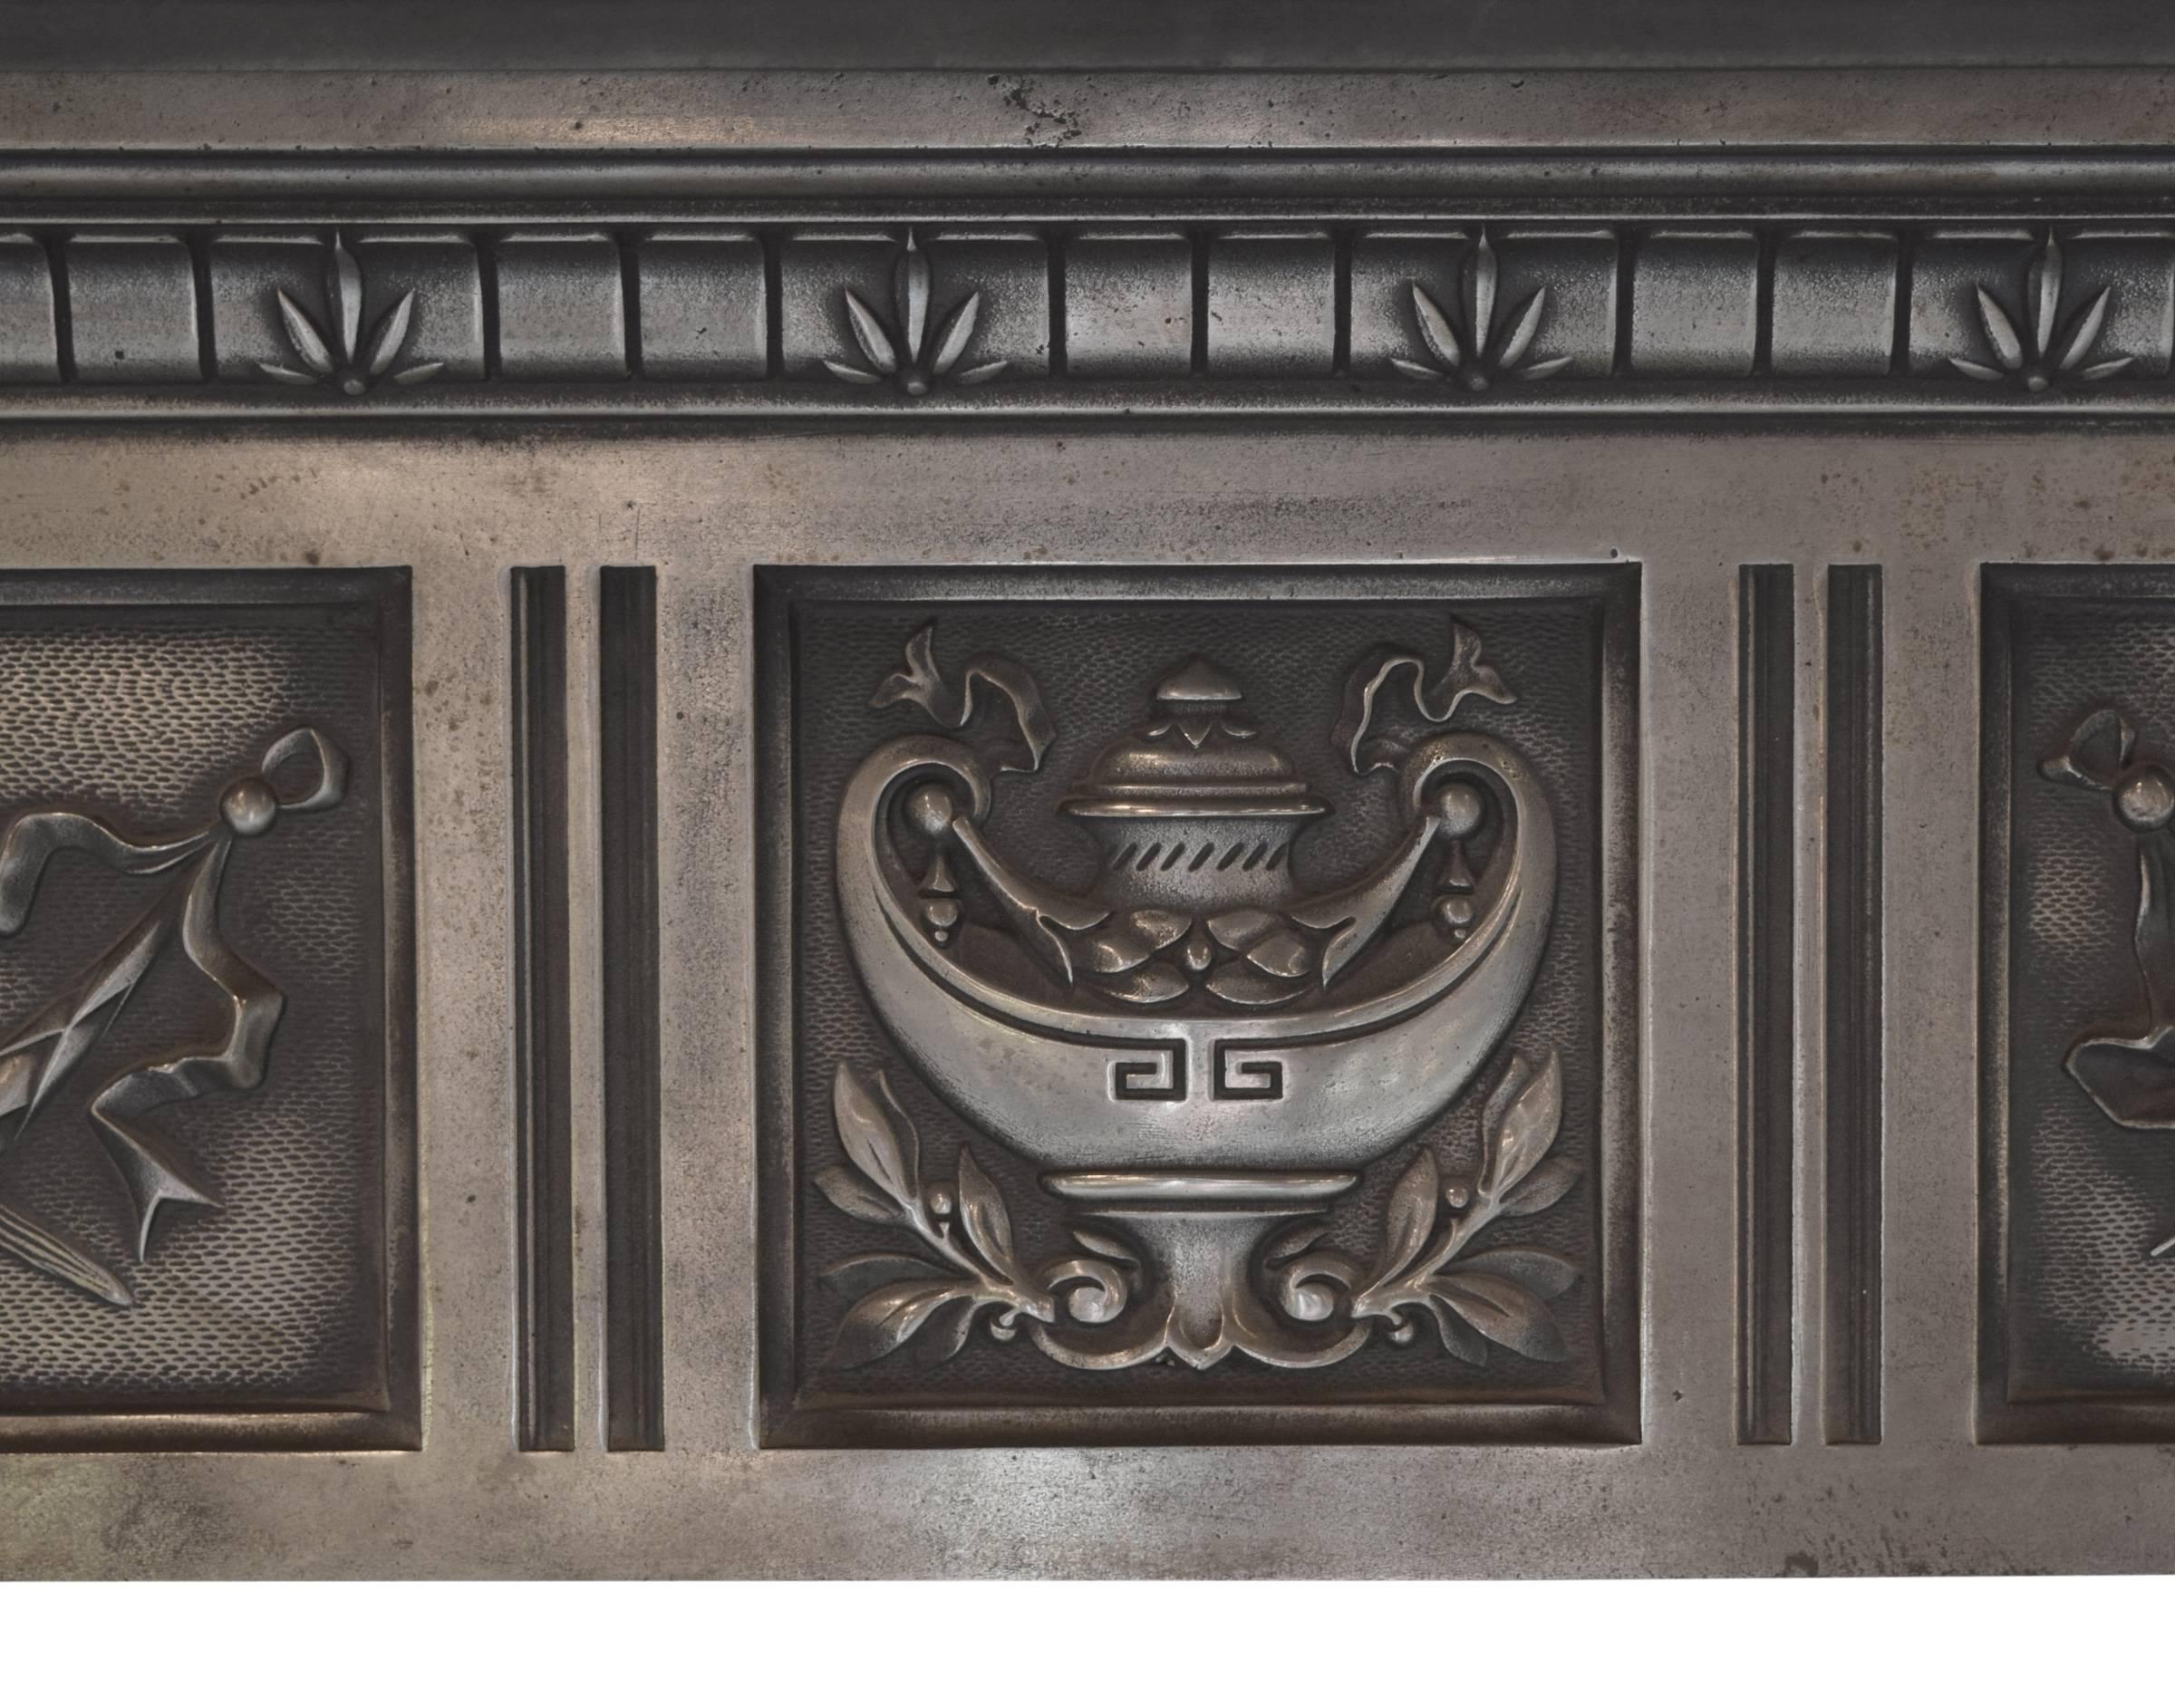 A late 19th century polished cast iron fireplace surround from England, with finely cast swallows, floral swags, sheafs of wheat, and a large lamp of knowledge. 

